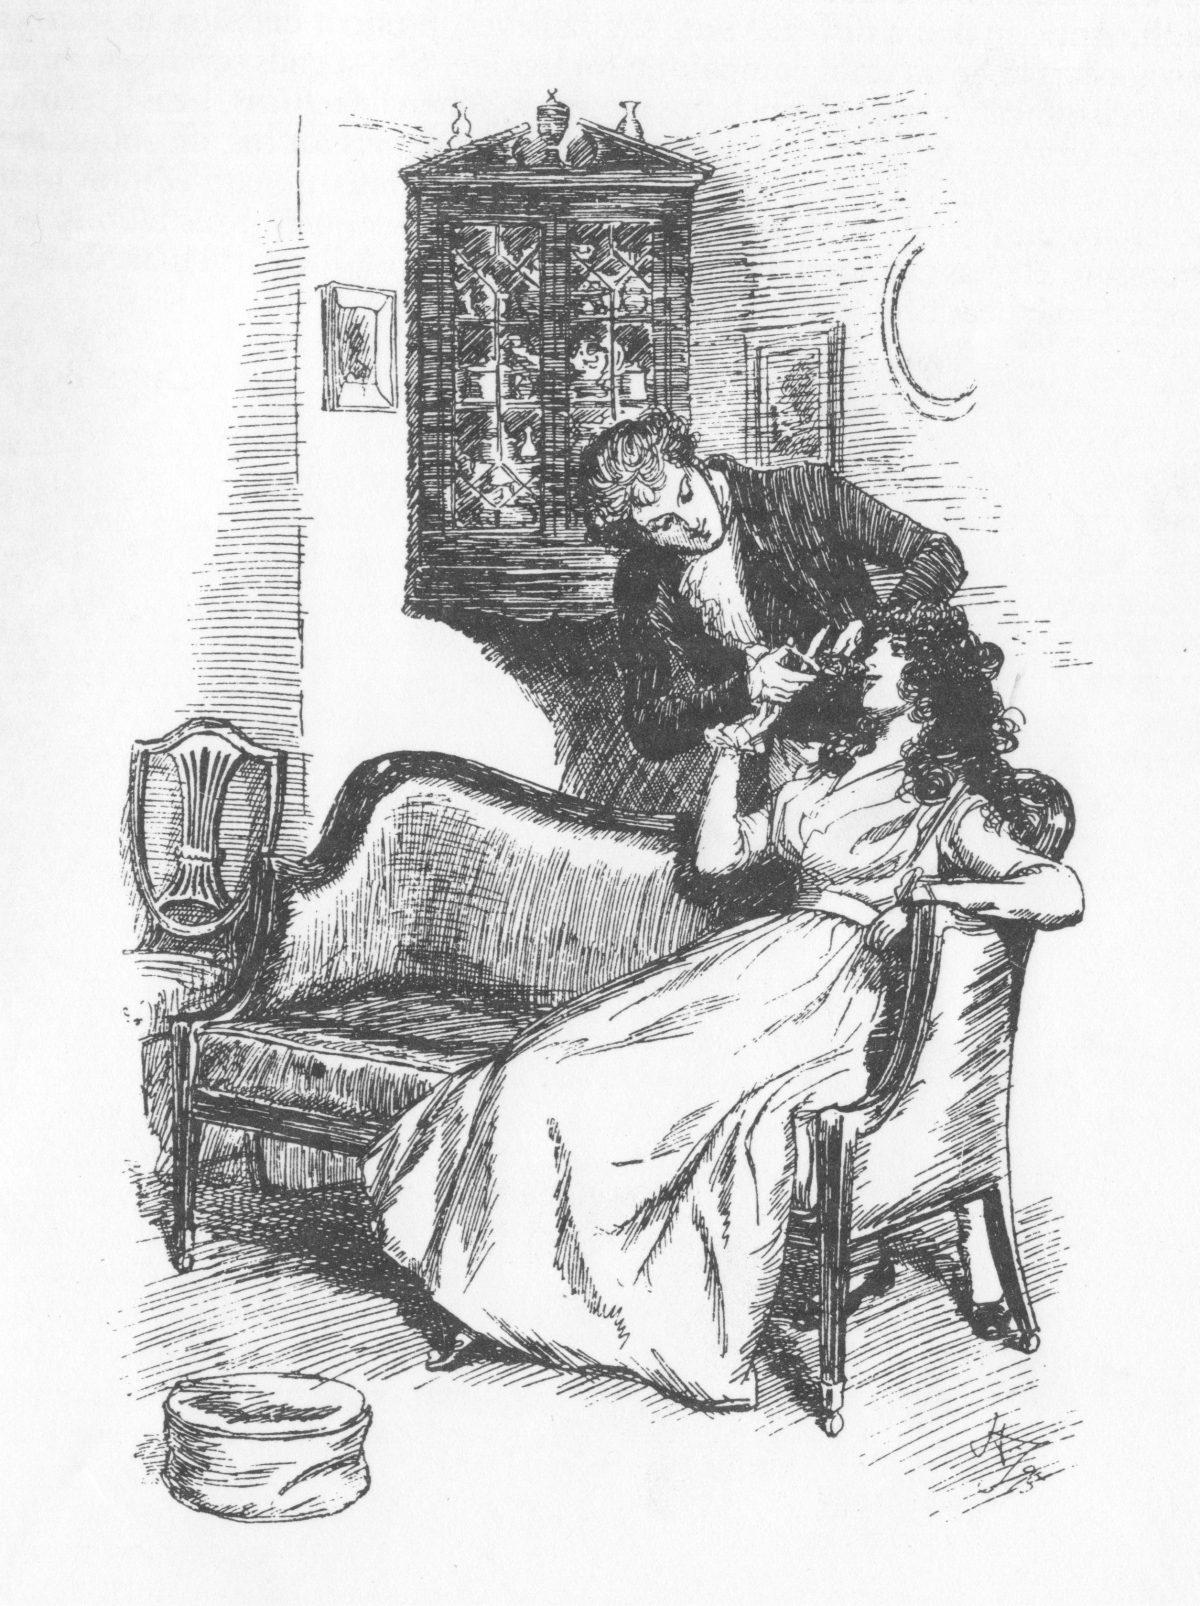 Marianne allows a gentleman to cut a lock of her hair as a keepsake, which at the time would have been considered improper unless the two were actually engaged. Illustration by Hugh Thomson, in the 1896 edition of “Sense and Sensibility.” (Public Domain)